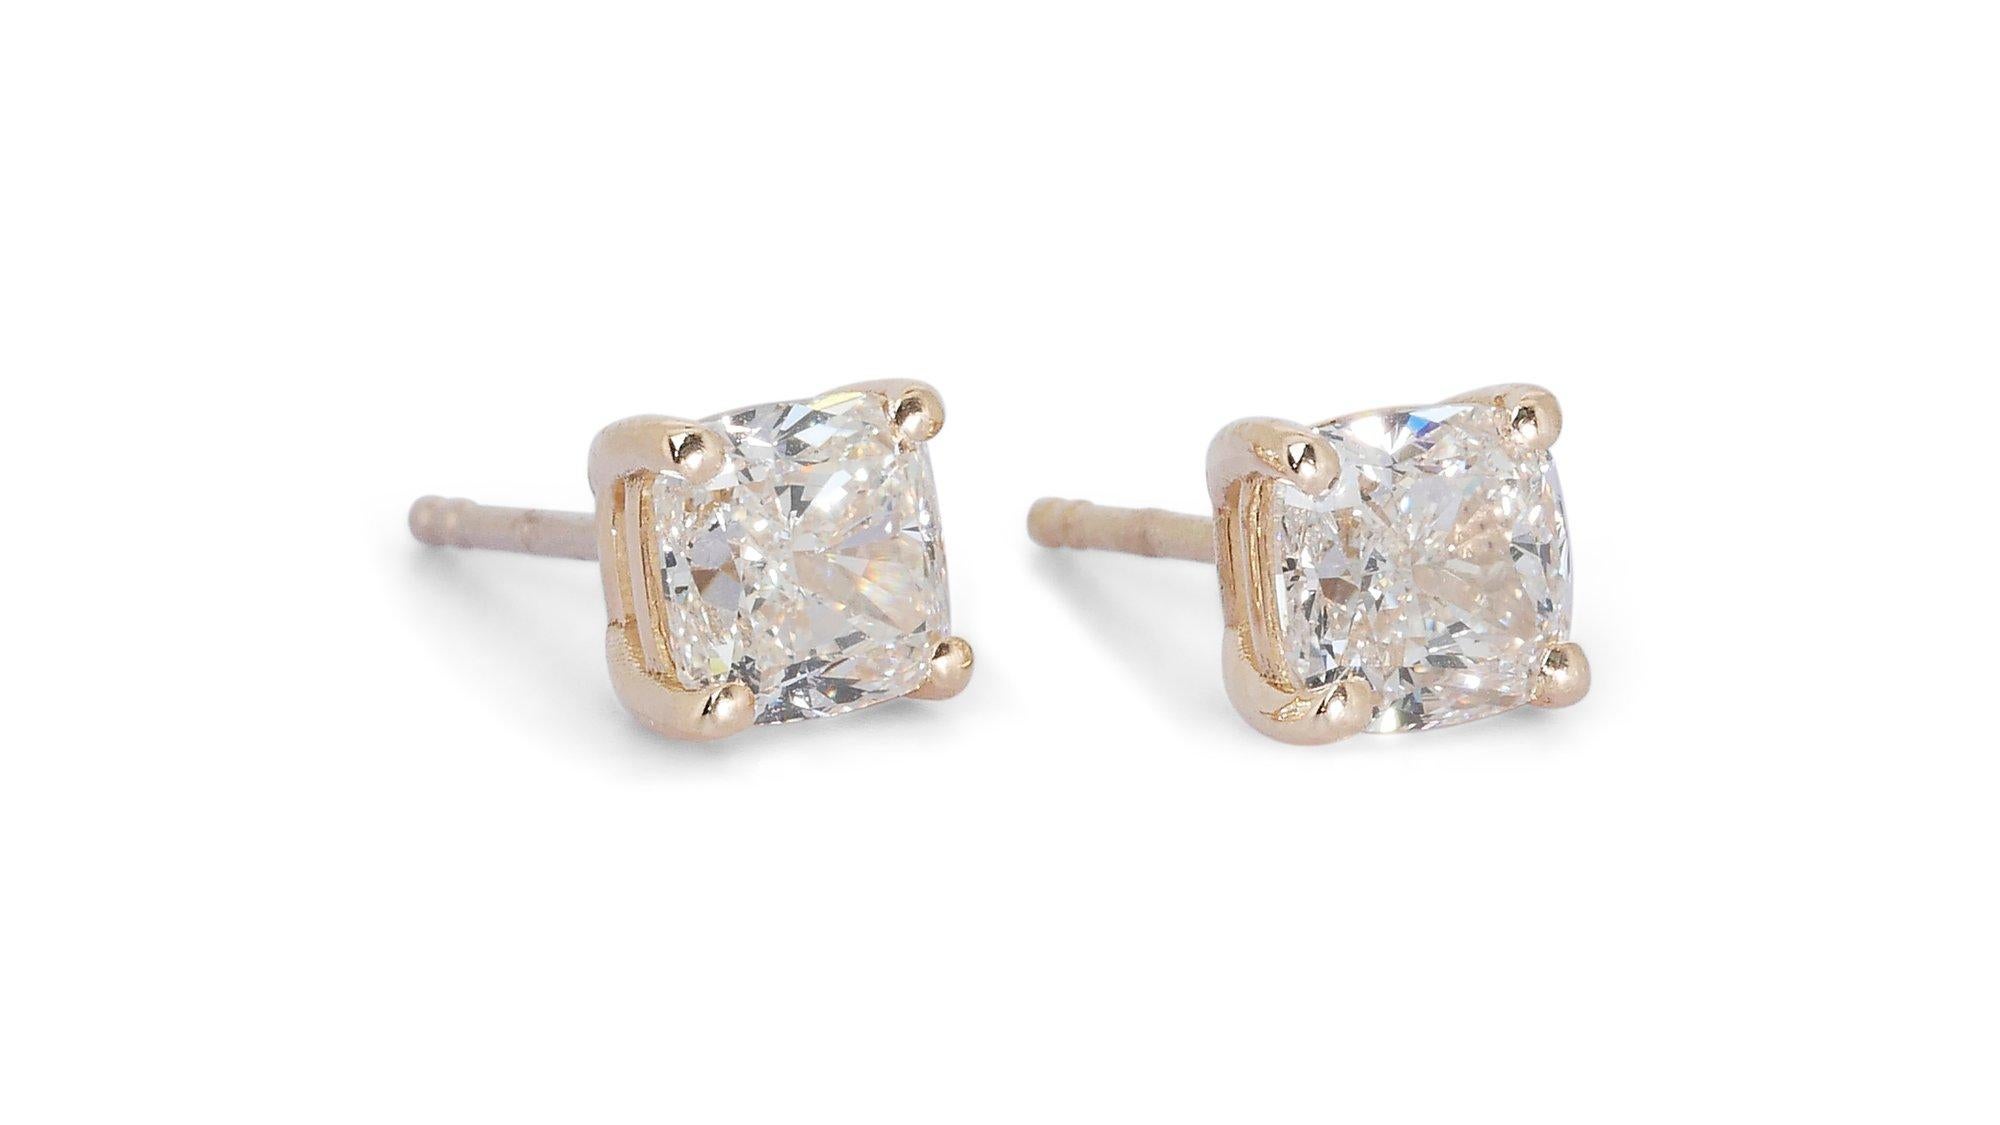 Glamorous 18k Yellow Gold Earrings w/ 2 ct Natural Diamonds IGI Certificate In New Condition For Sale In רמת גן, IL